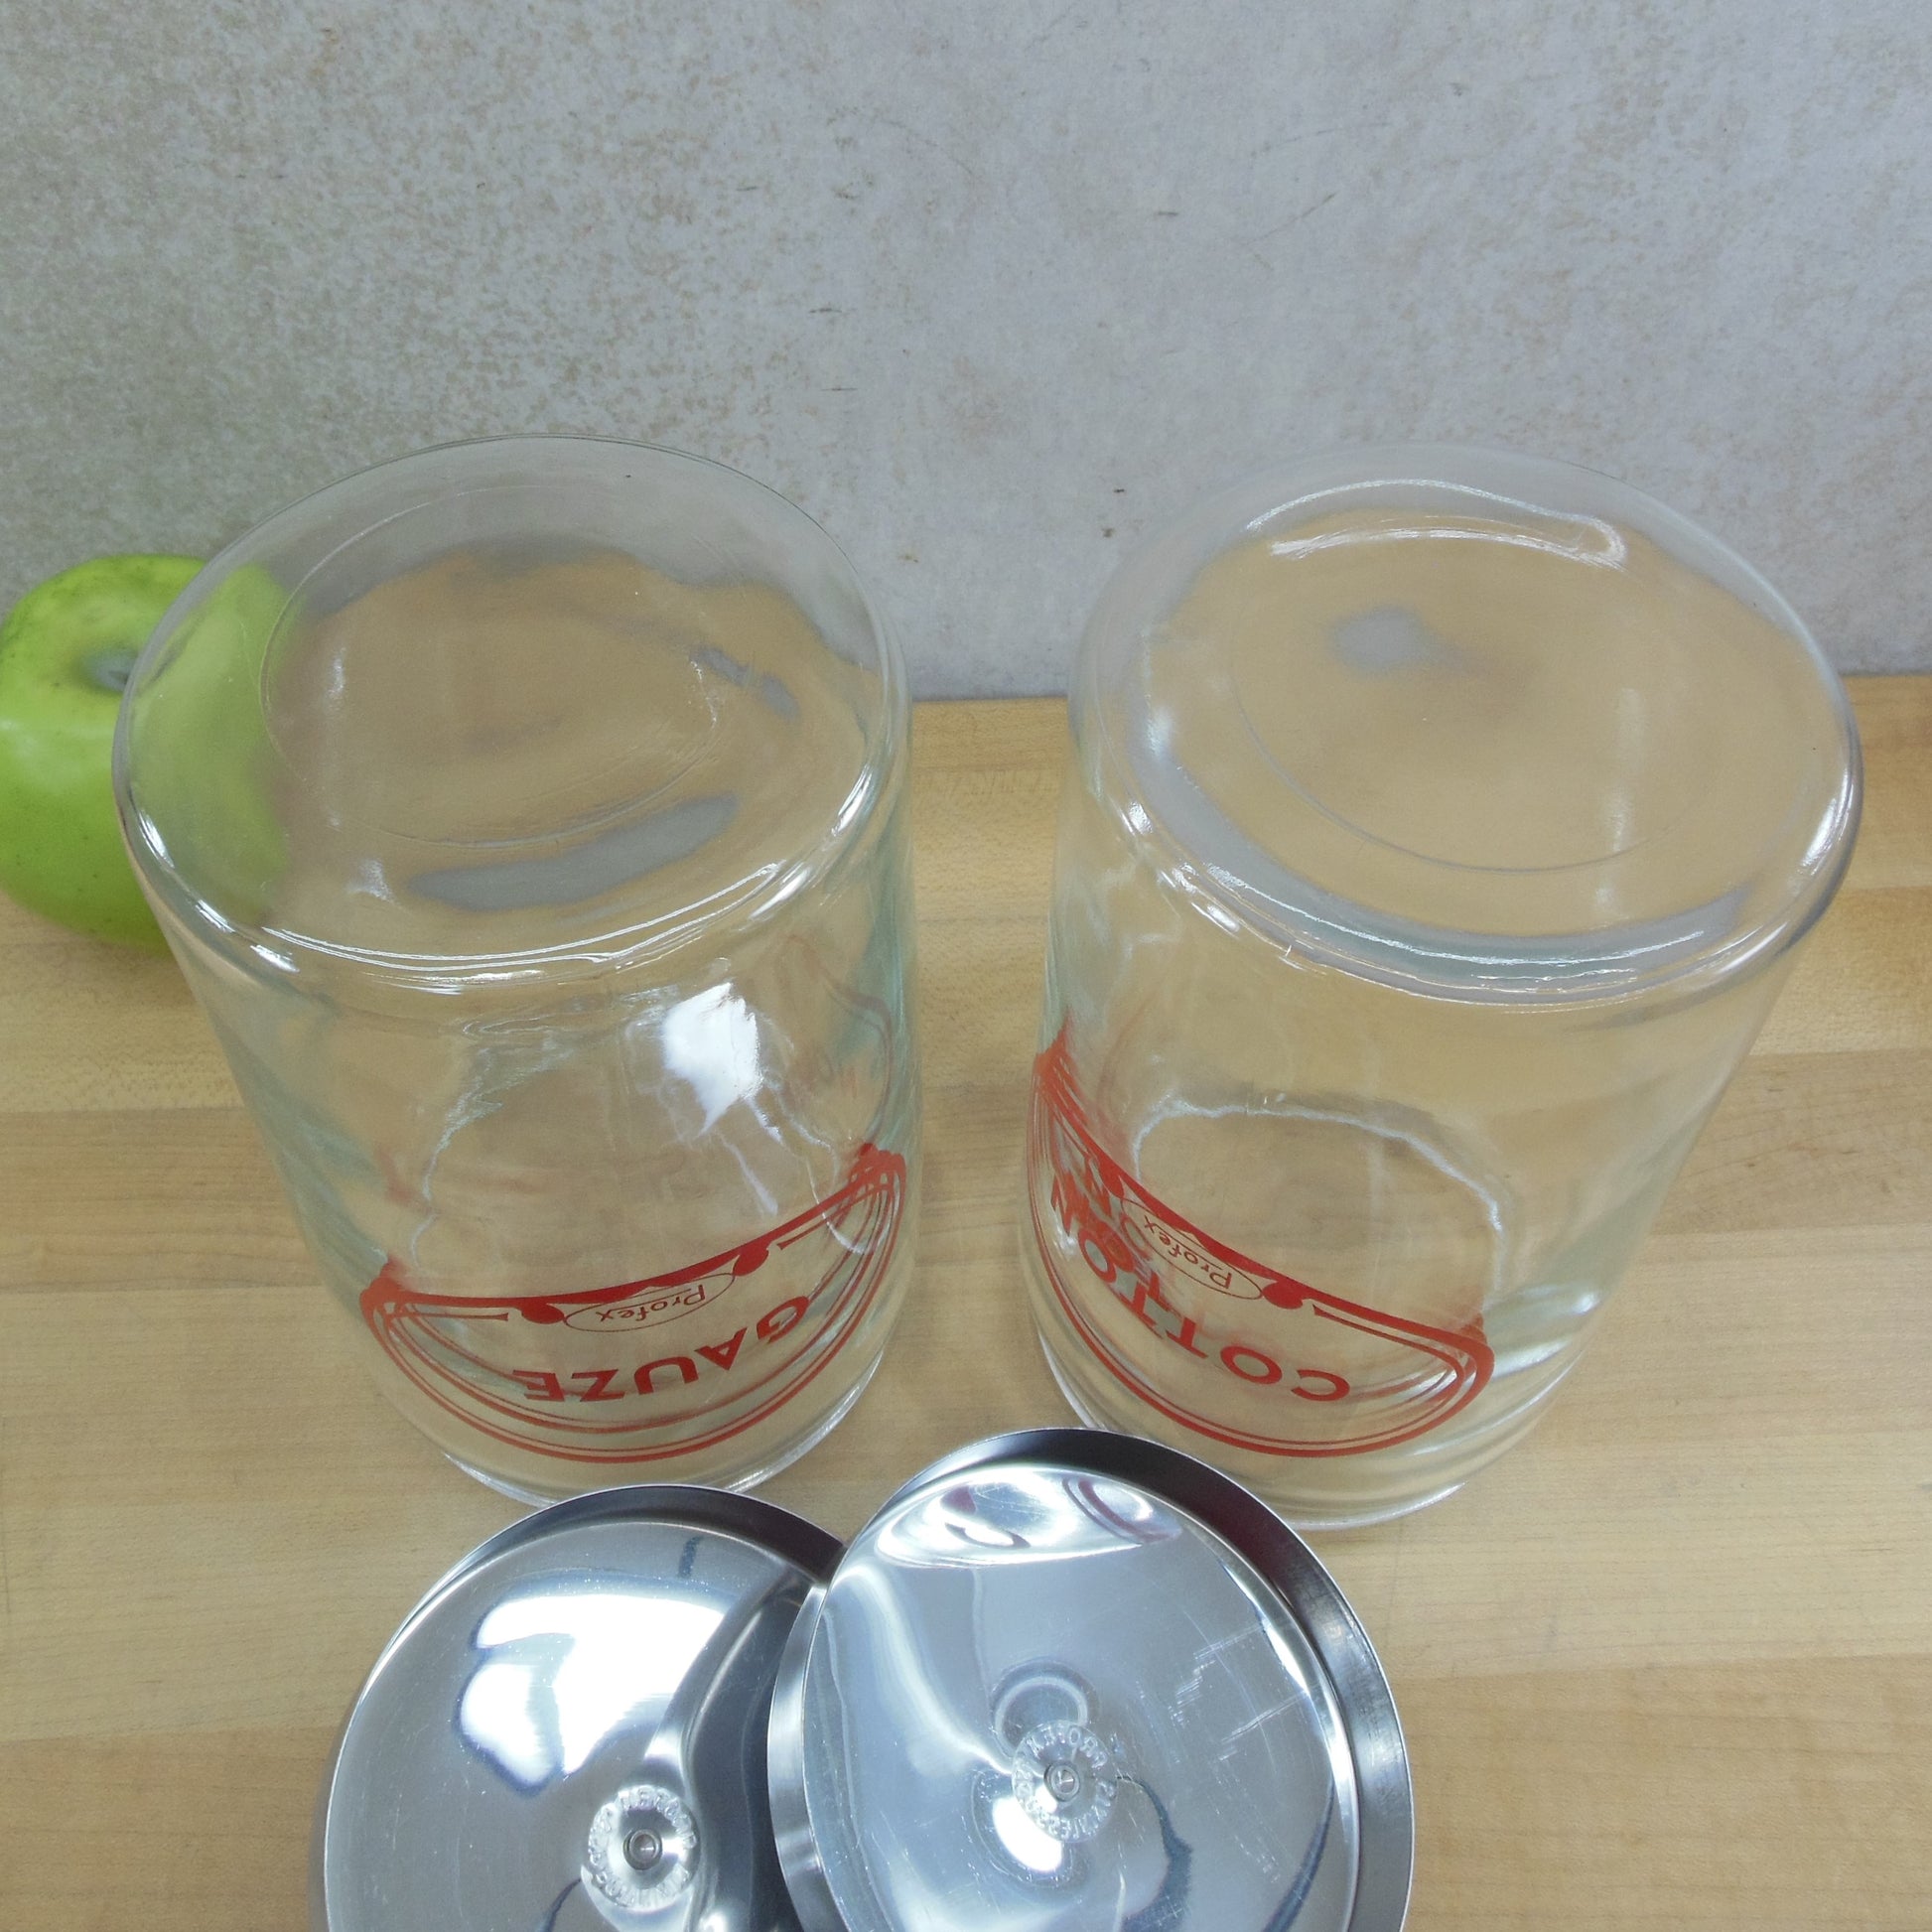 Profex Gauze Cotton Red Label Medical Glass Jars Containers used